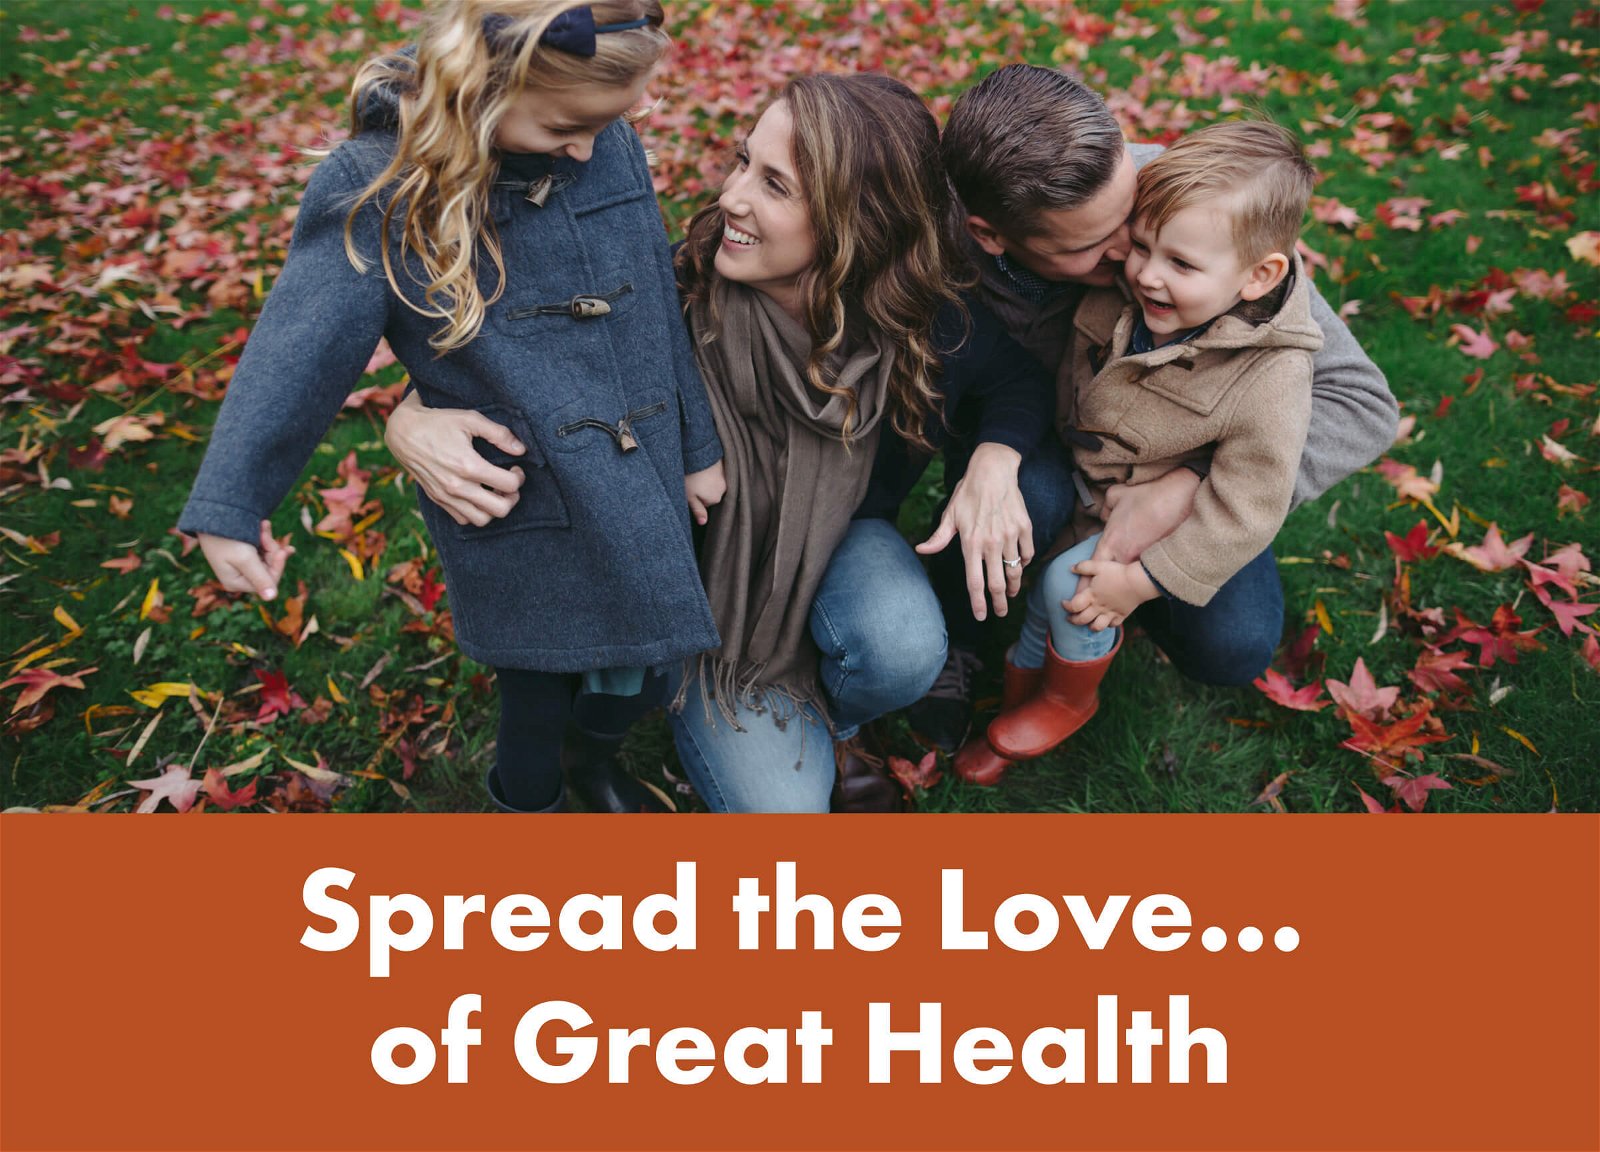 Spread the Love...of Great Health